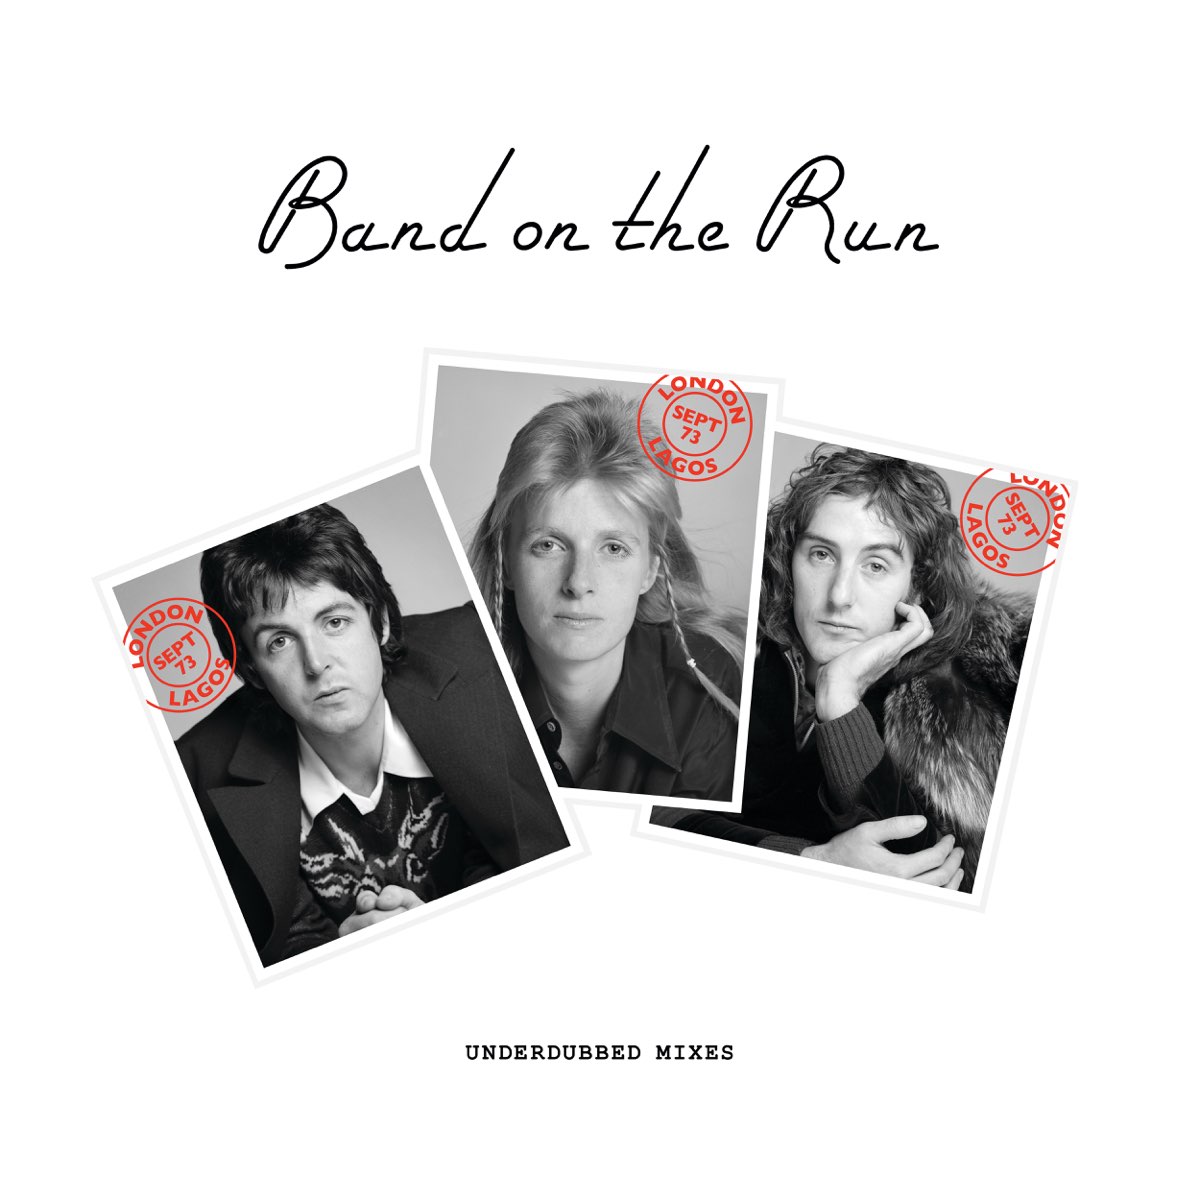 Band On The Run (Underdubbed Mixes) - ポール・マッカートニー 